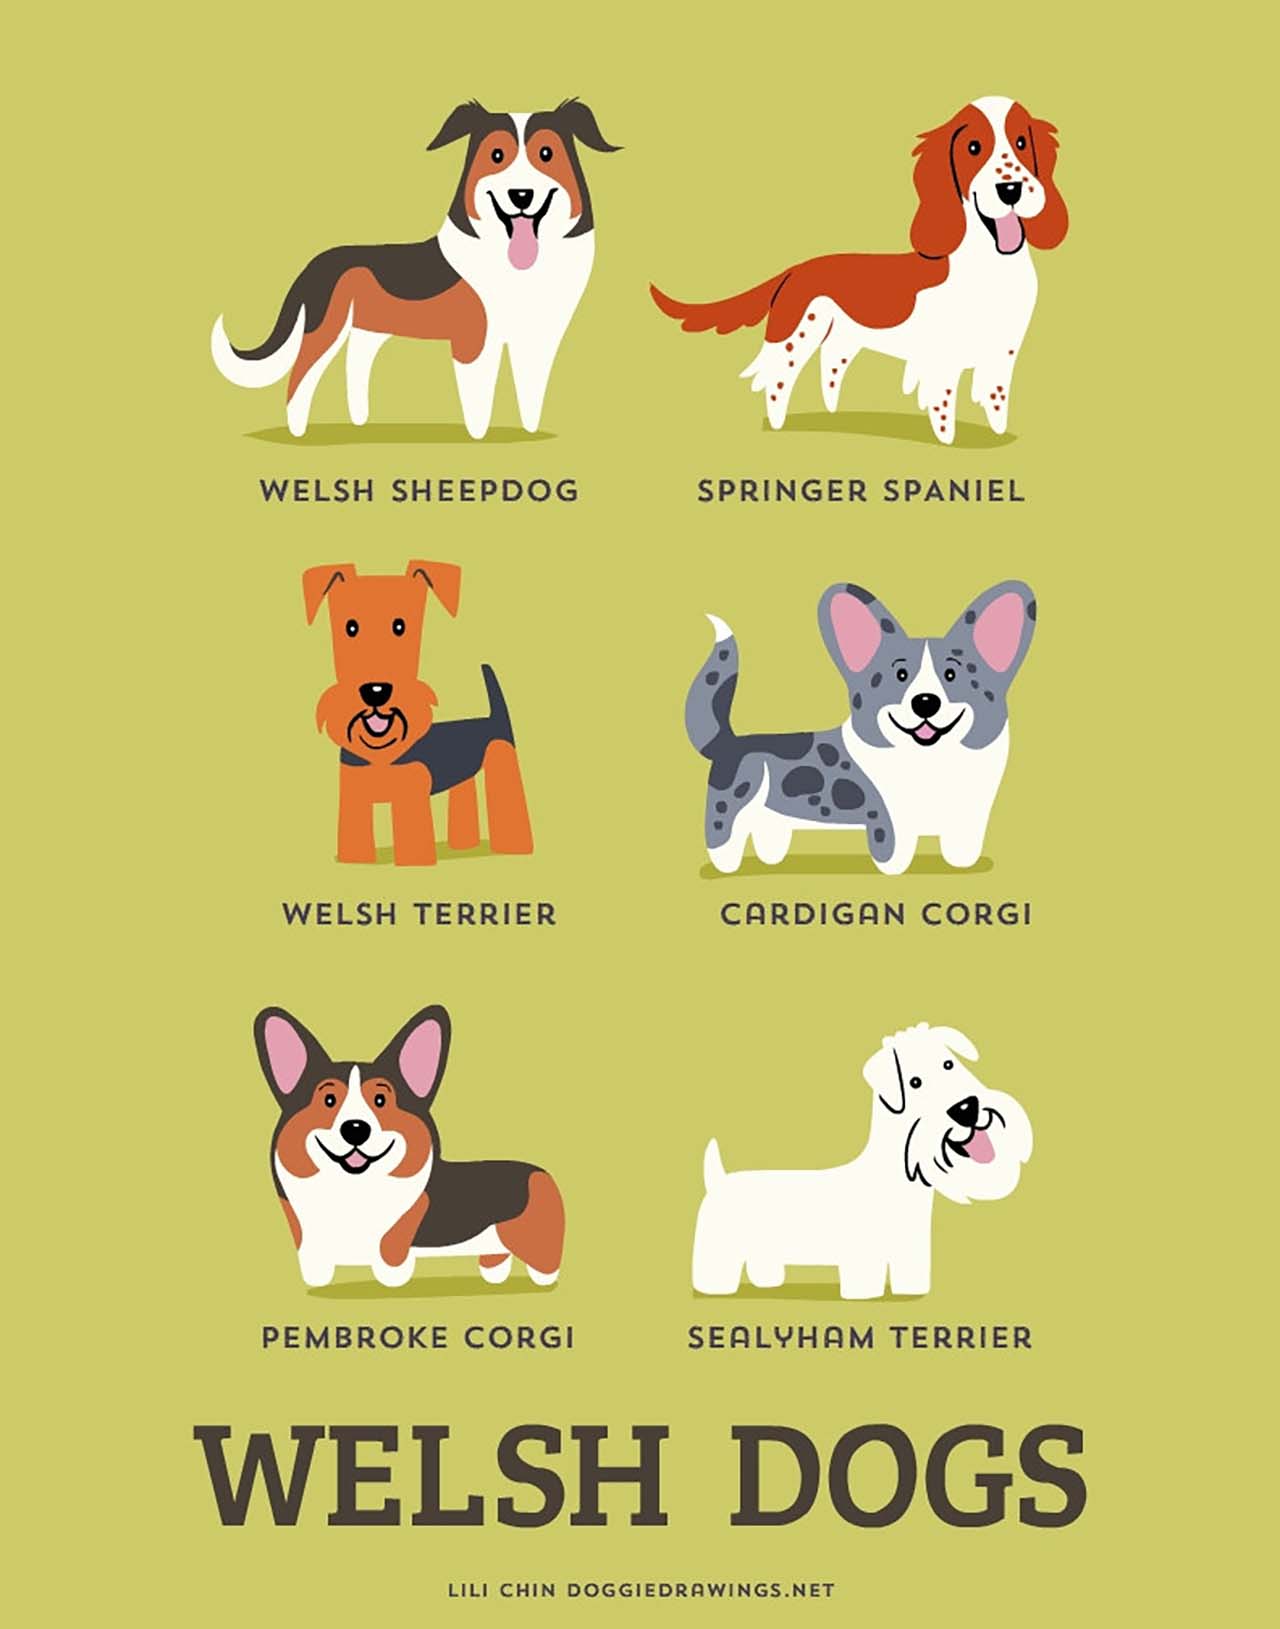 Origin Of Dogs: Cute Illustration By Lili Chin Show Where Dog Breeds Originating From #16: Welsh Dogs